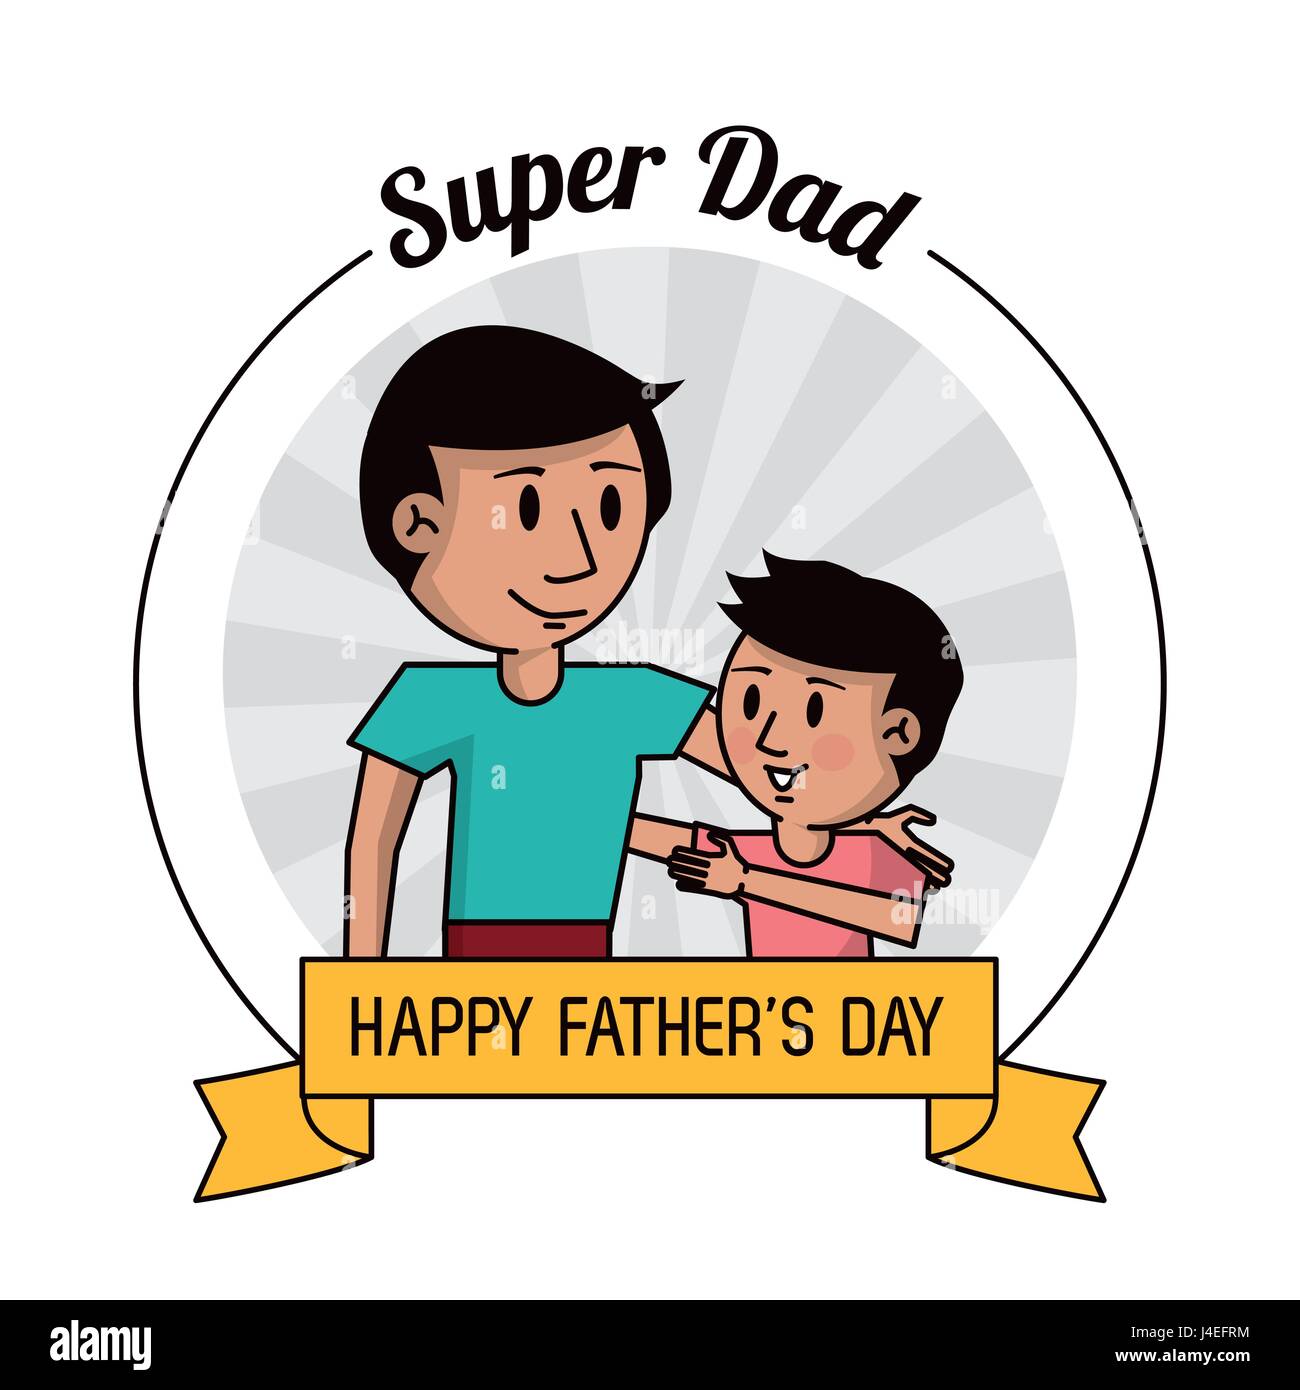 super dad. happy fathers day card, dad and son hugging image Stock ...